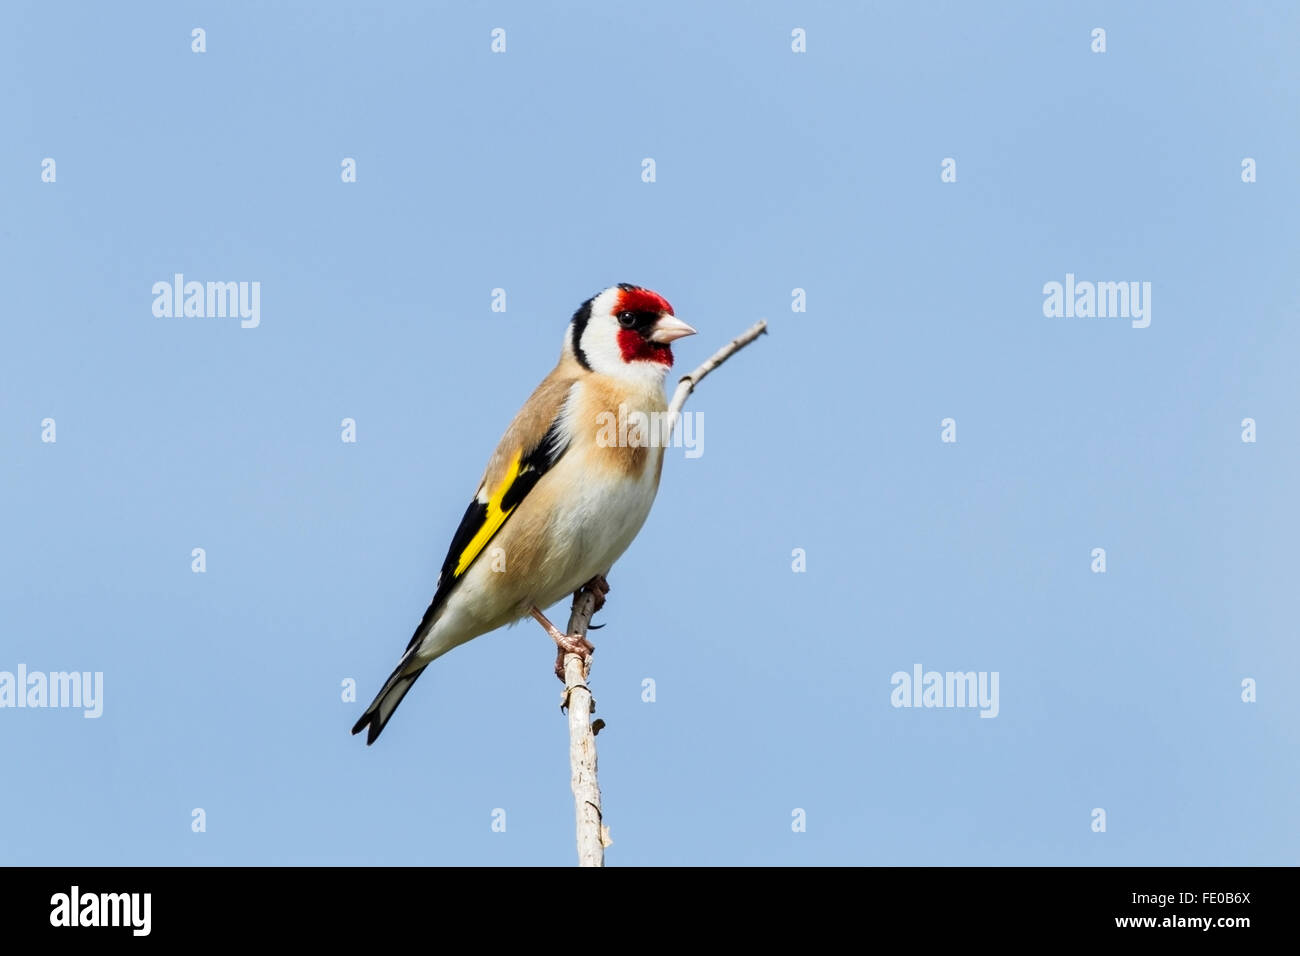 goldfinch (Carduelis carduelis) adult perched on branch of tree against a blue sky, Norfolk, England Stock Photo